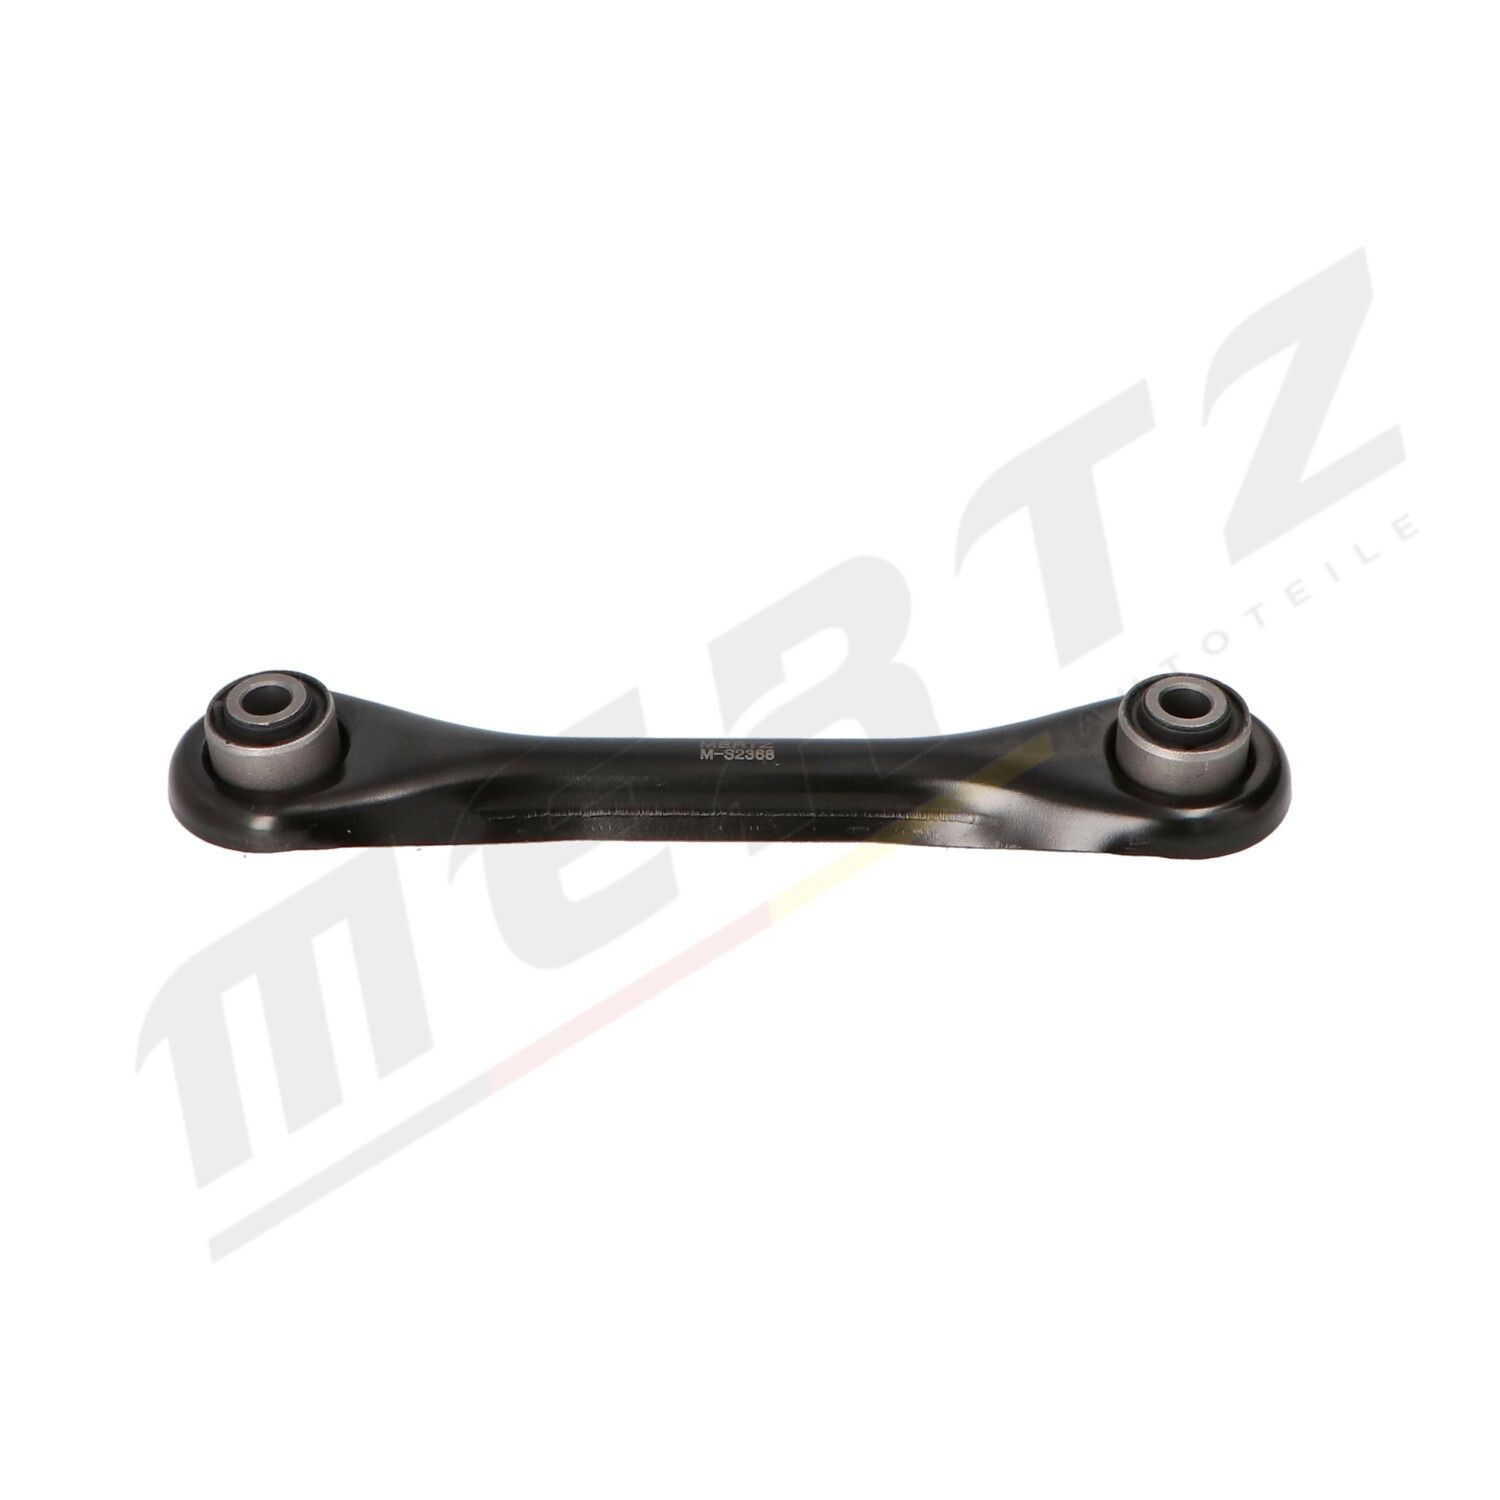 MERTZ M-S2368 Suspension arm with bearing(s), Rear Axle Left, Rear Axle Right, Lower, Control Arm, Sheet Steel